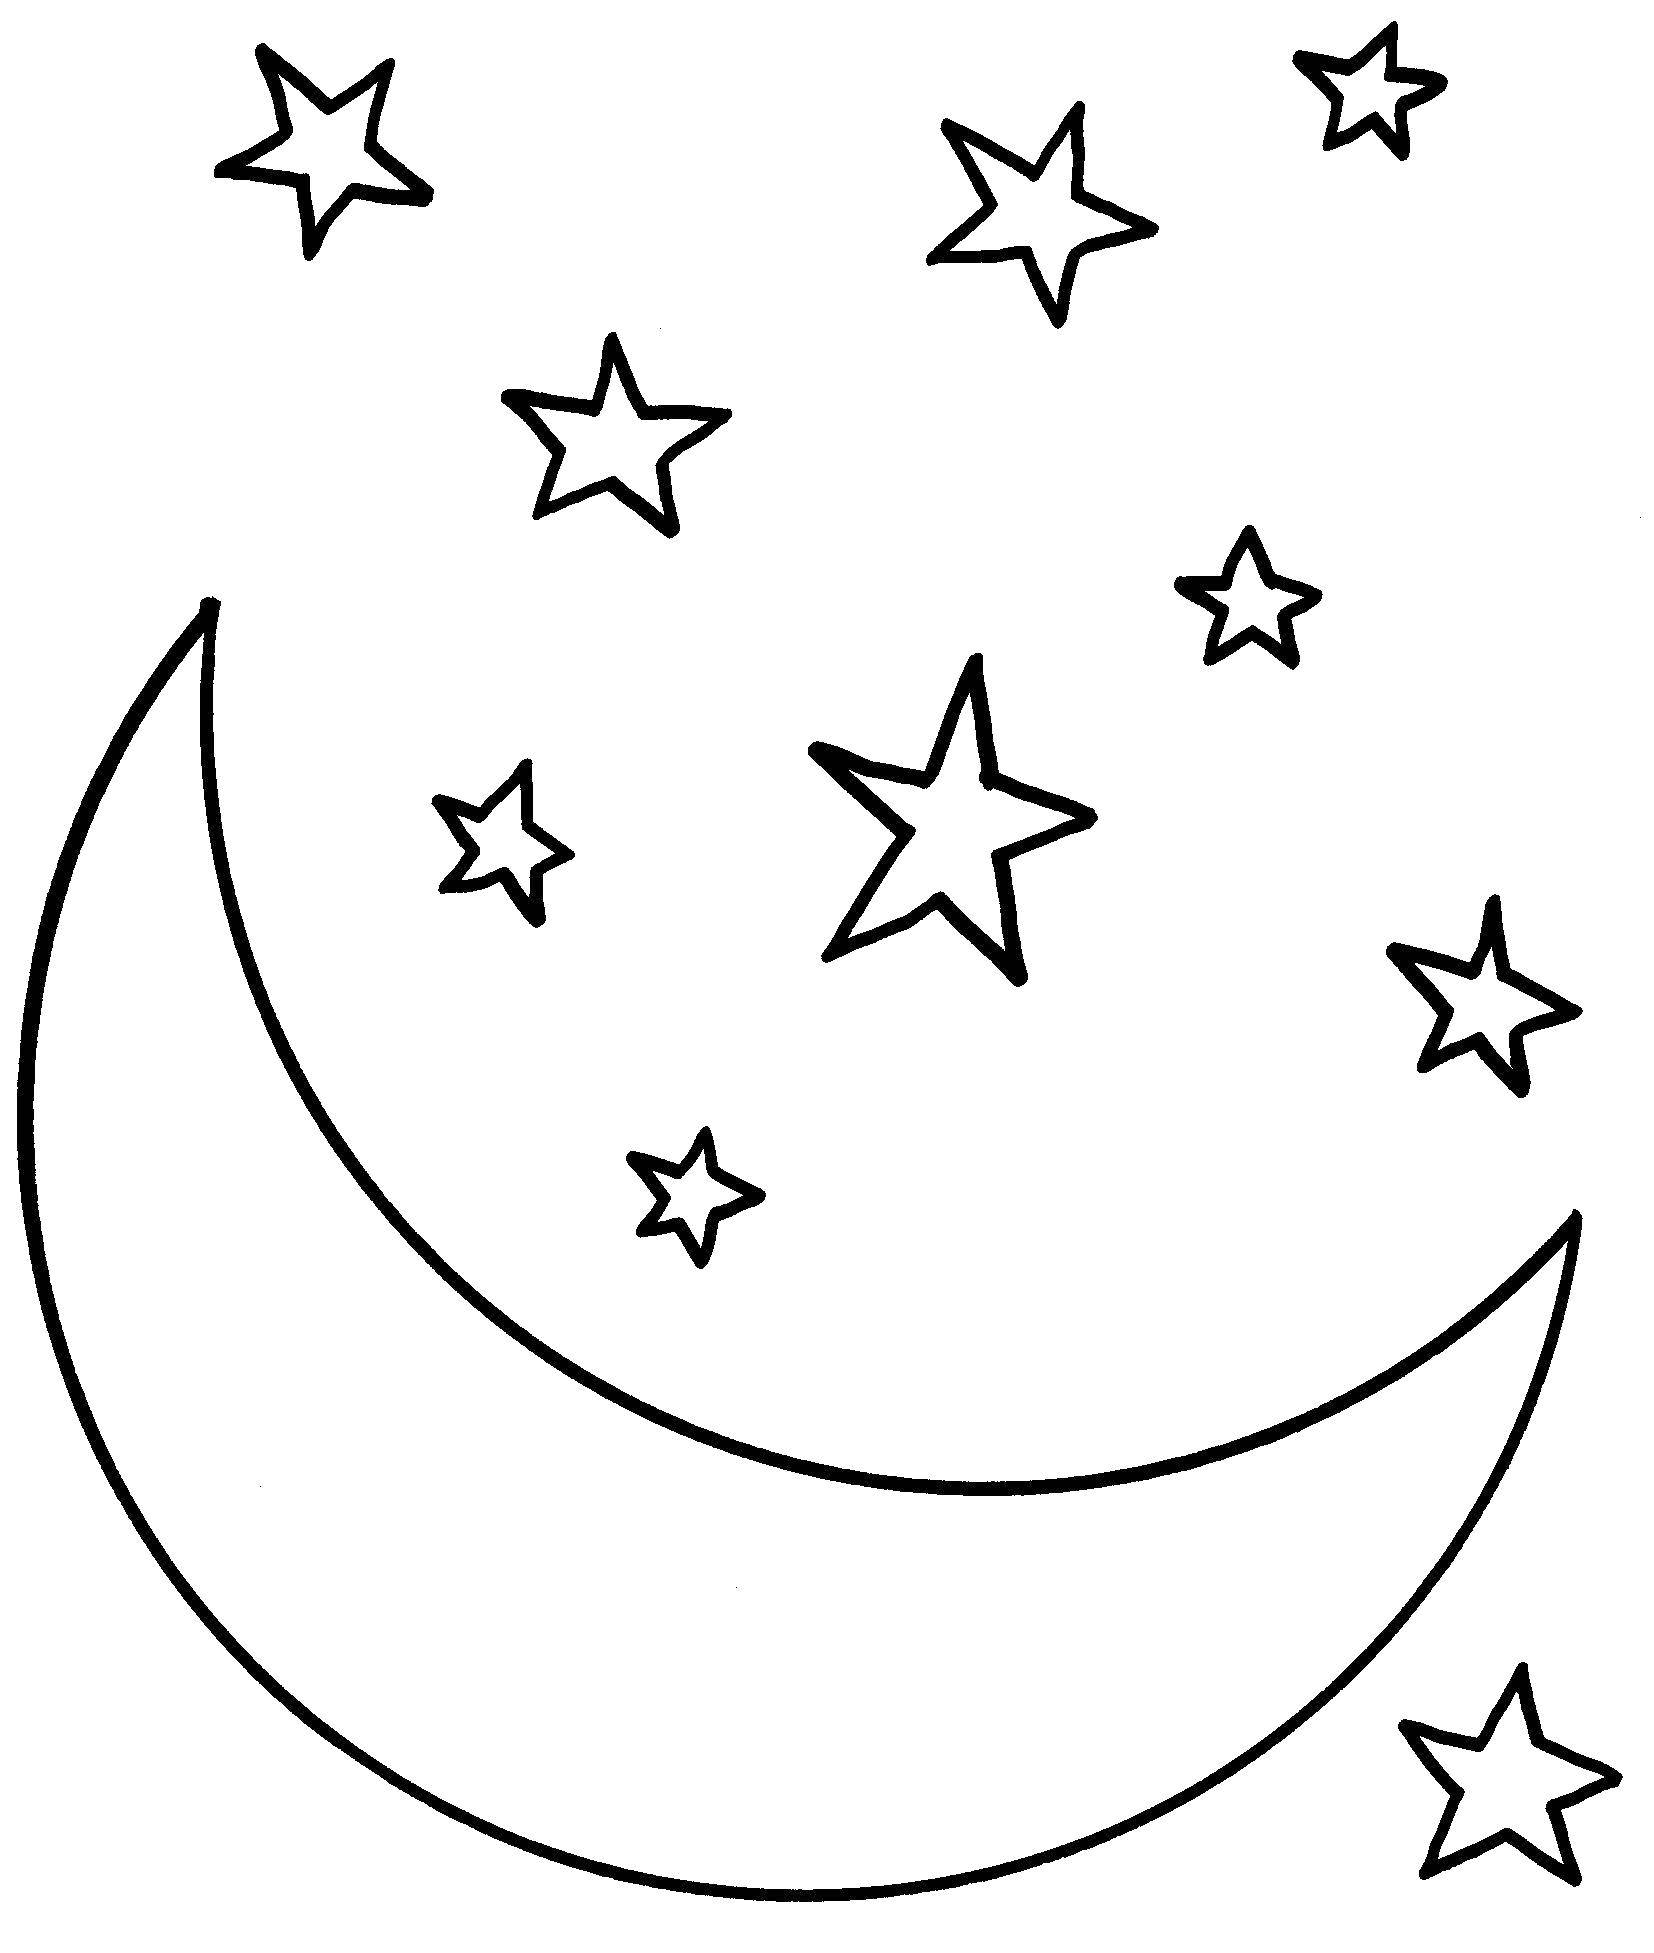 Coloring A month among the stars. Category moon. Tags:  star.